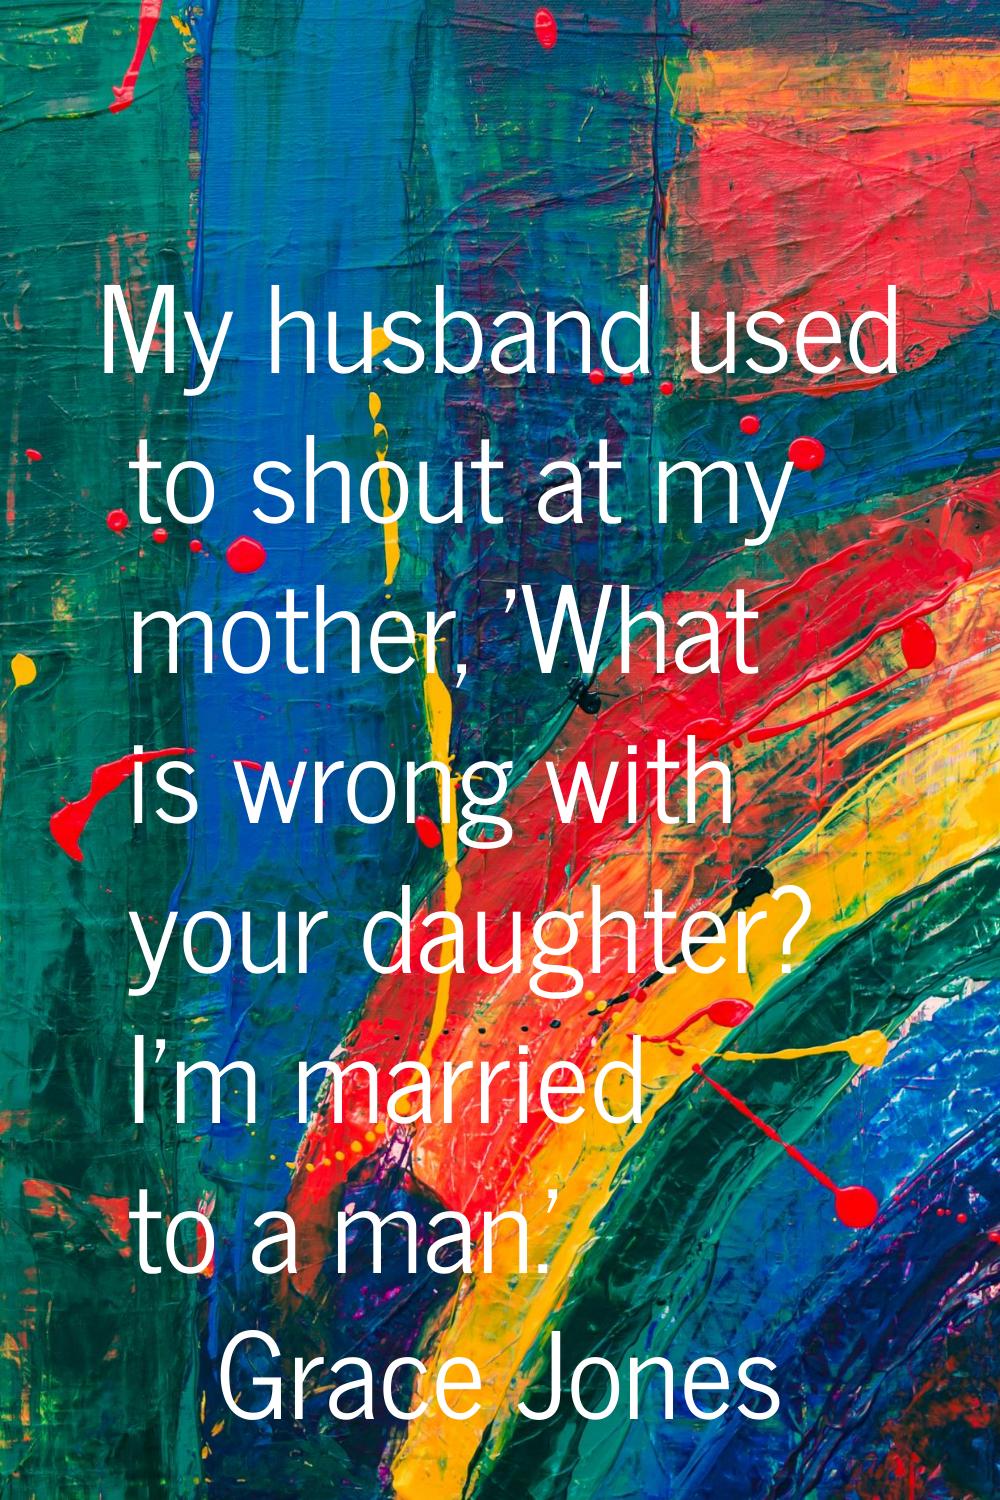 My husband used to shout at my mother, 'What is wrong with your daughter? I'm married to a man.'